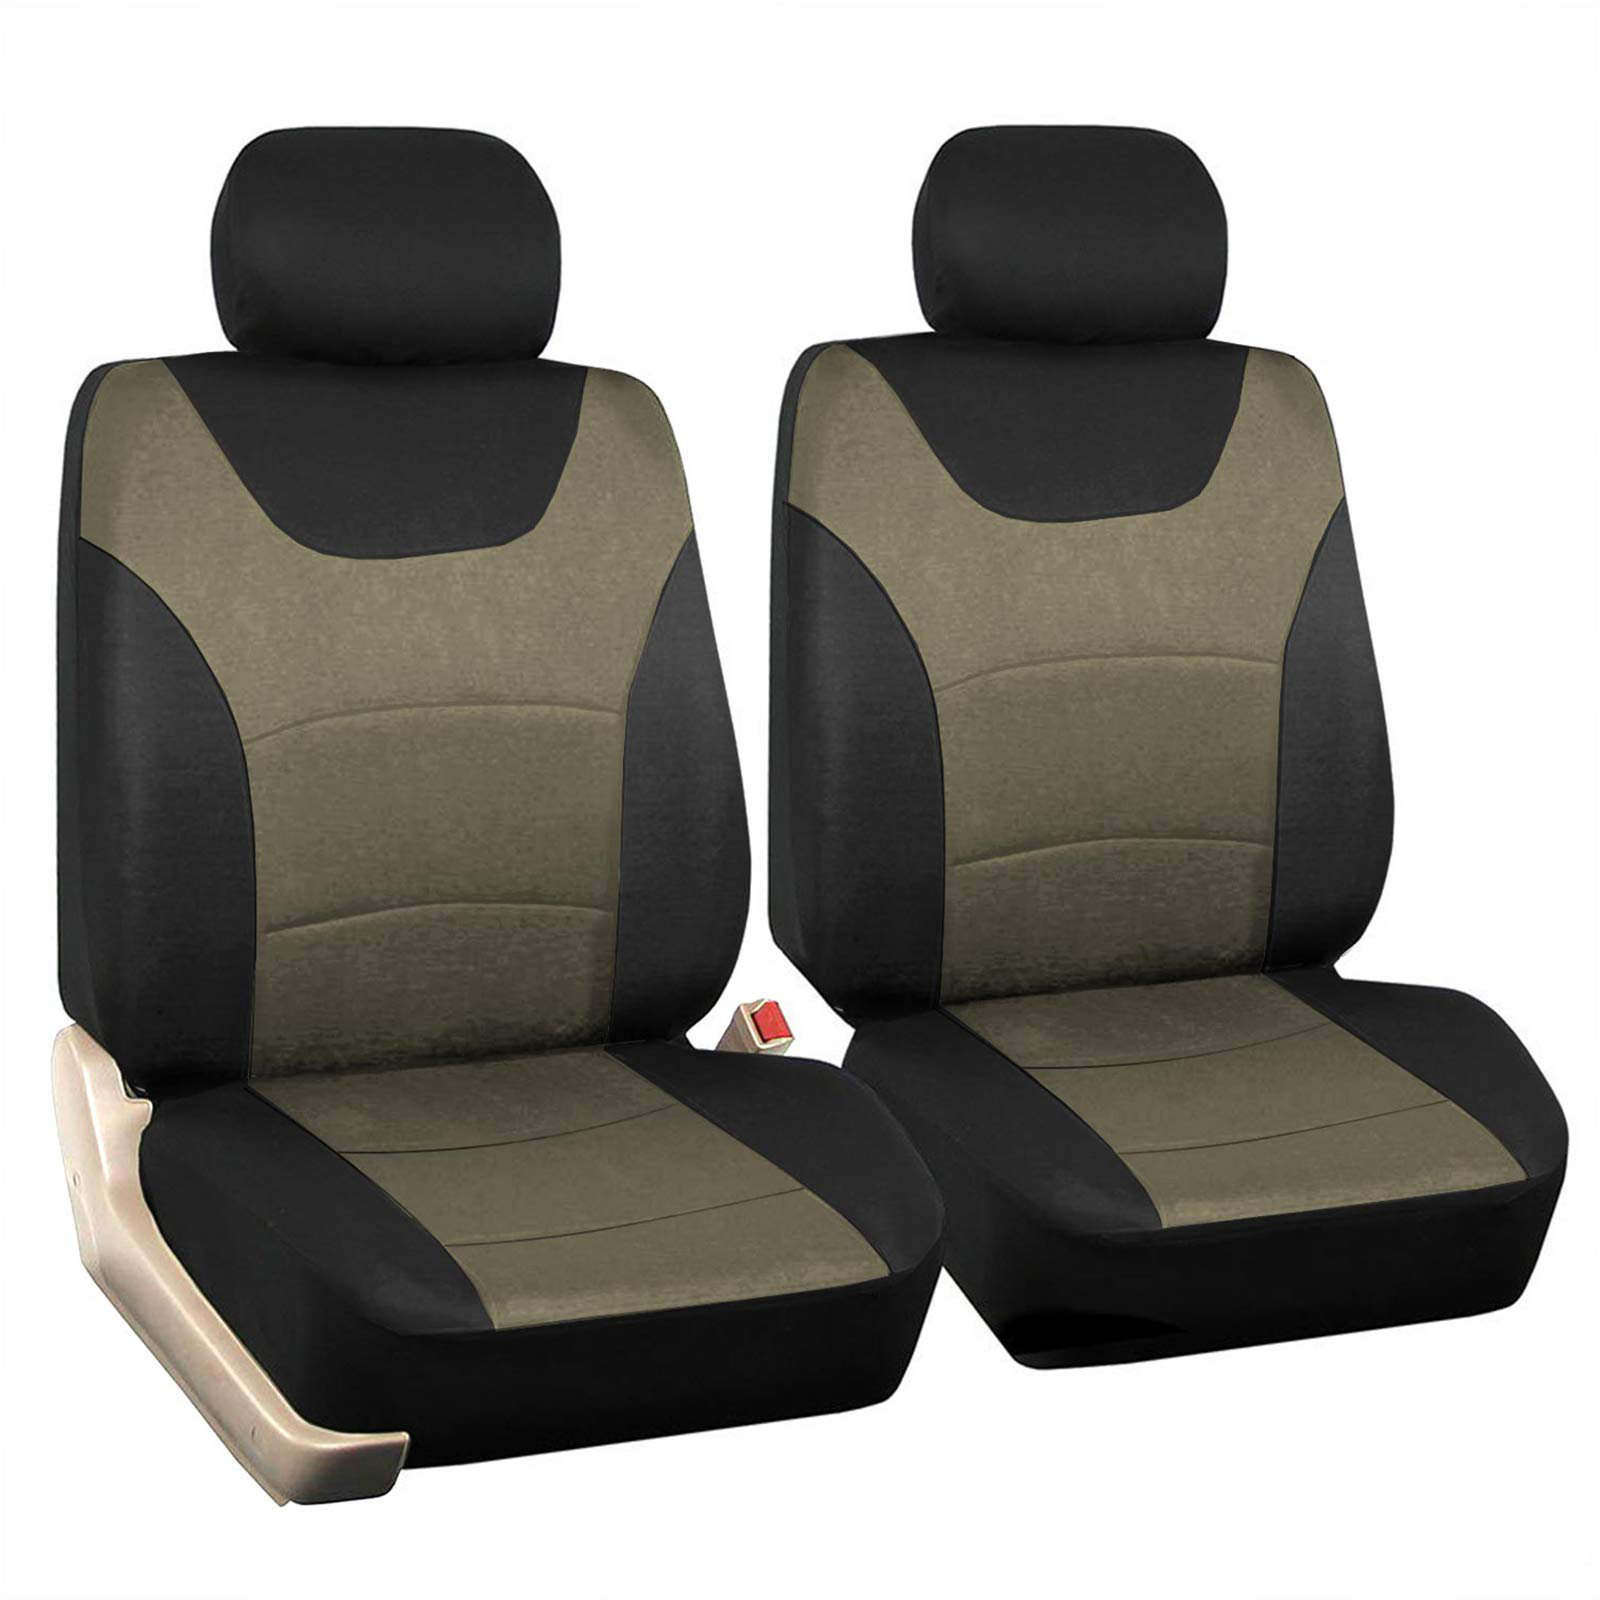 Premium Car Seat Cover Pu Leather Car Seat Bottom Covers Protectors Include 1 Pair Front Driver Seat Pad Mat and 1 Rear Bench Cover Universal Fit 90% Vehicles Sedan SUV Pickup Mini Van Brown 